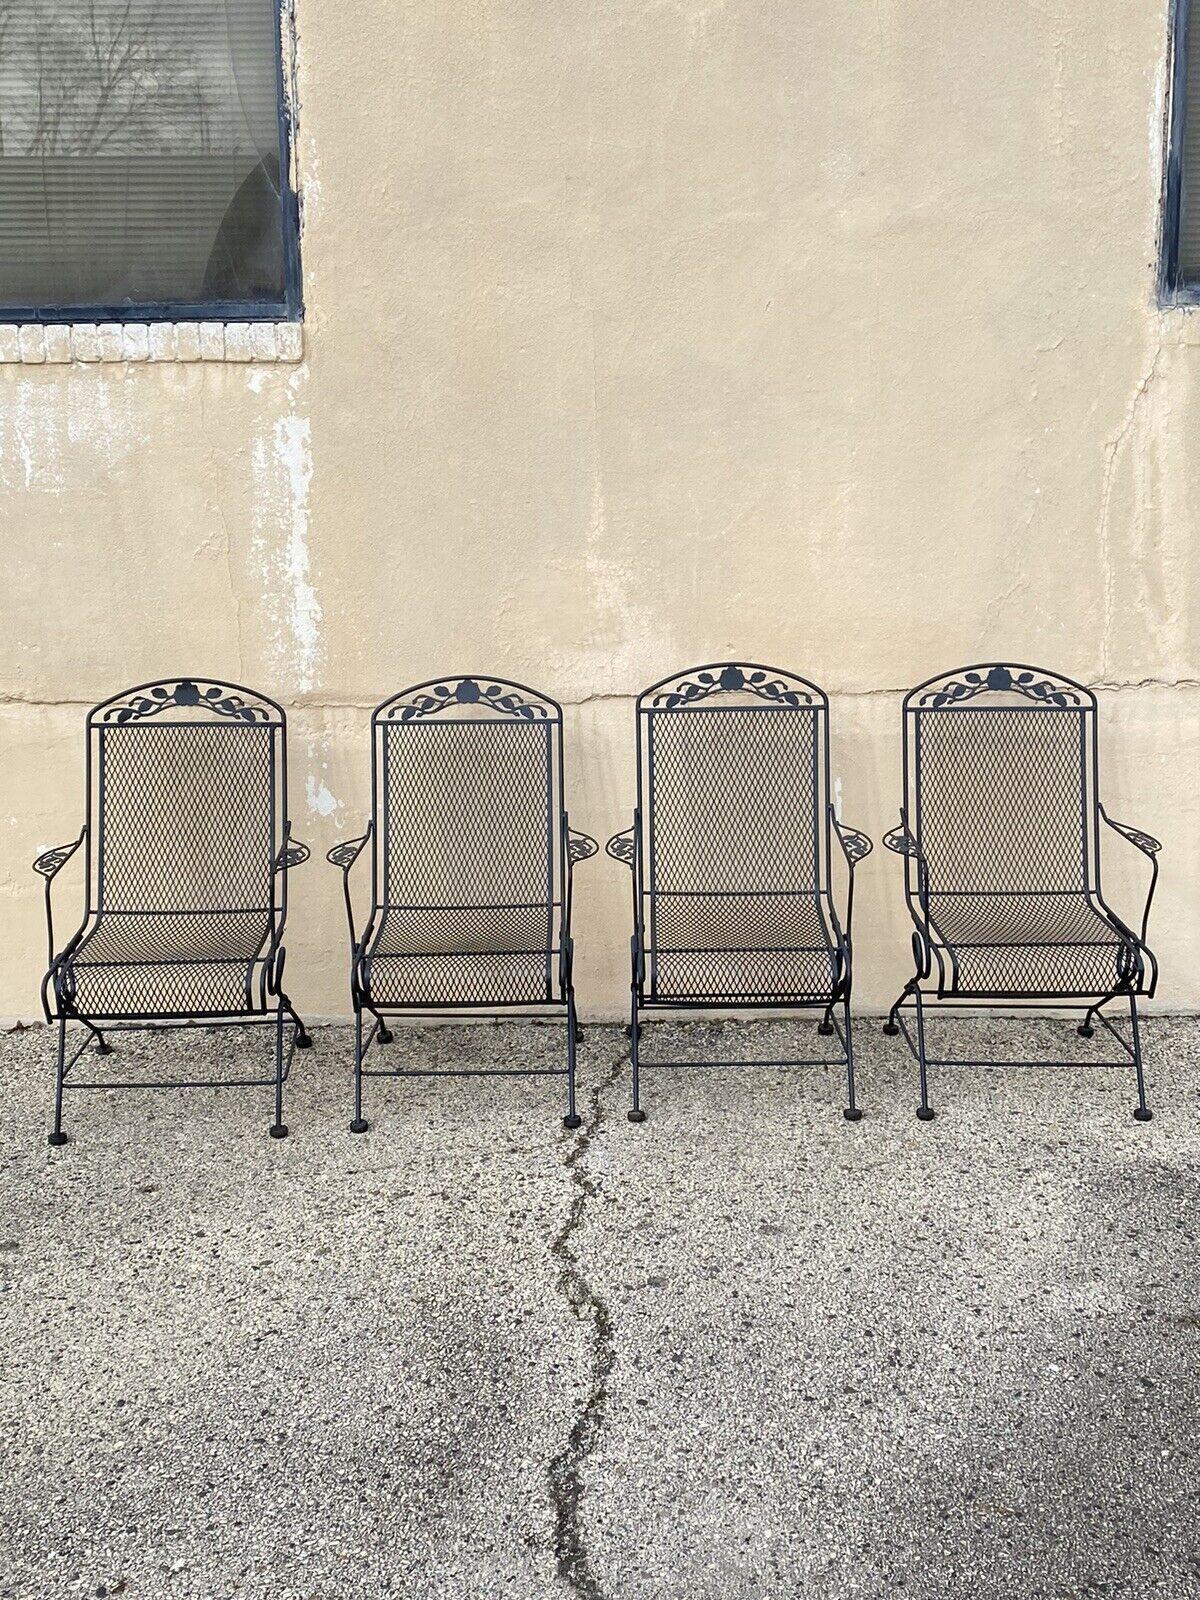 Vintage Woodard Wrought Iron Rose Pattern Springer Patio Arm Chairs - Set of 4. Circa Late 20th to Early 21st Century. Measurements: 39.5